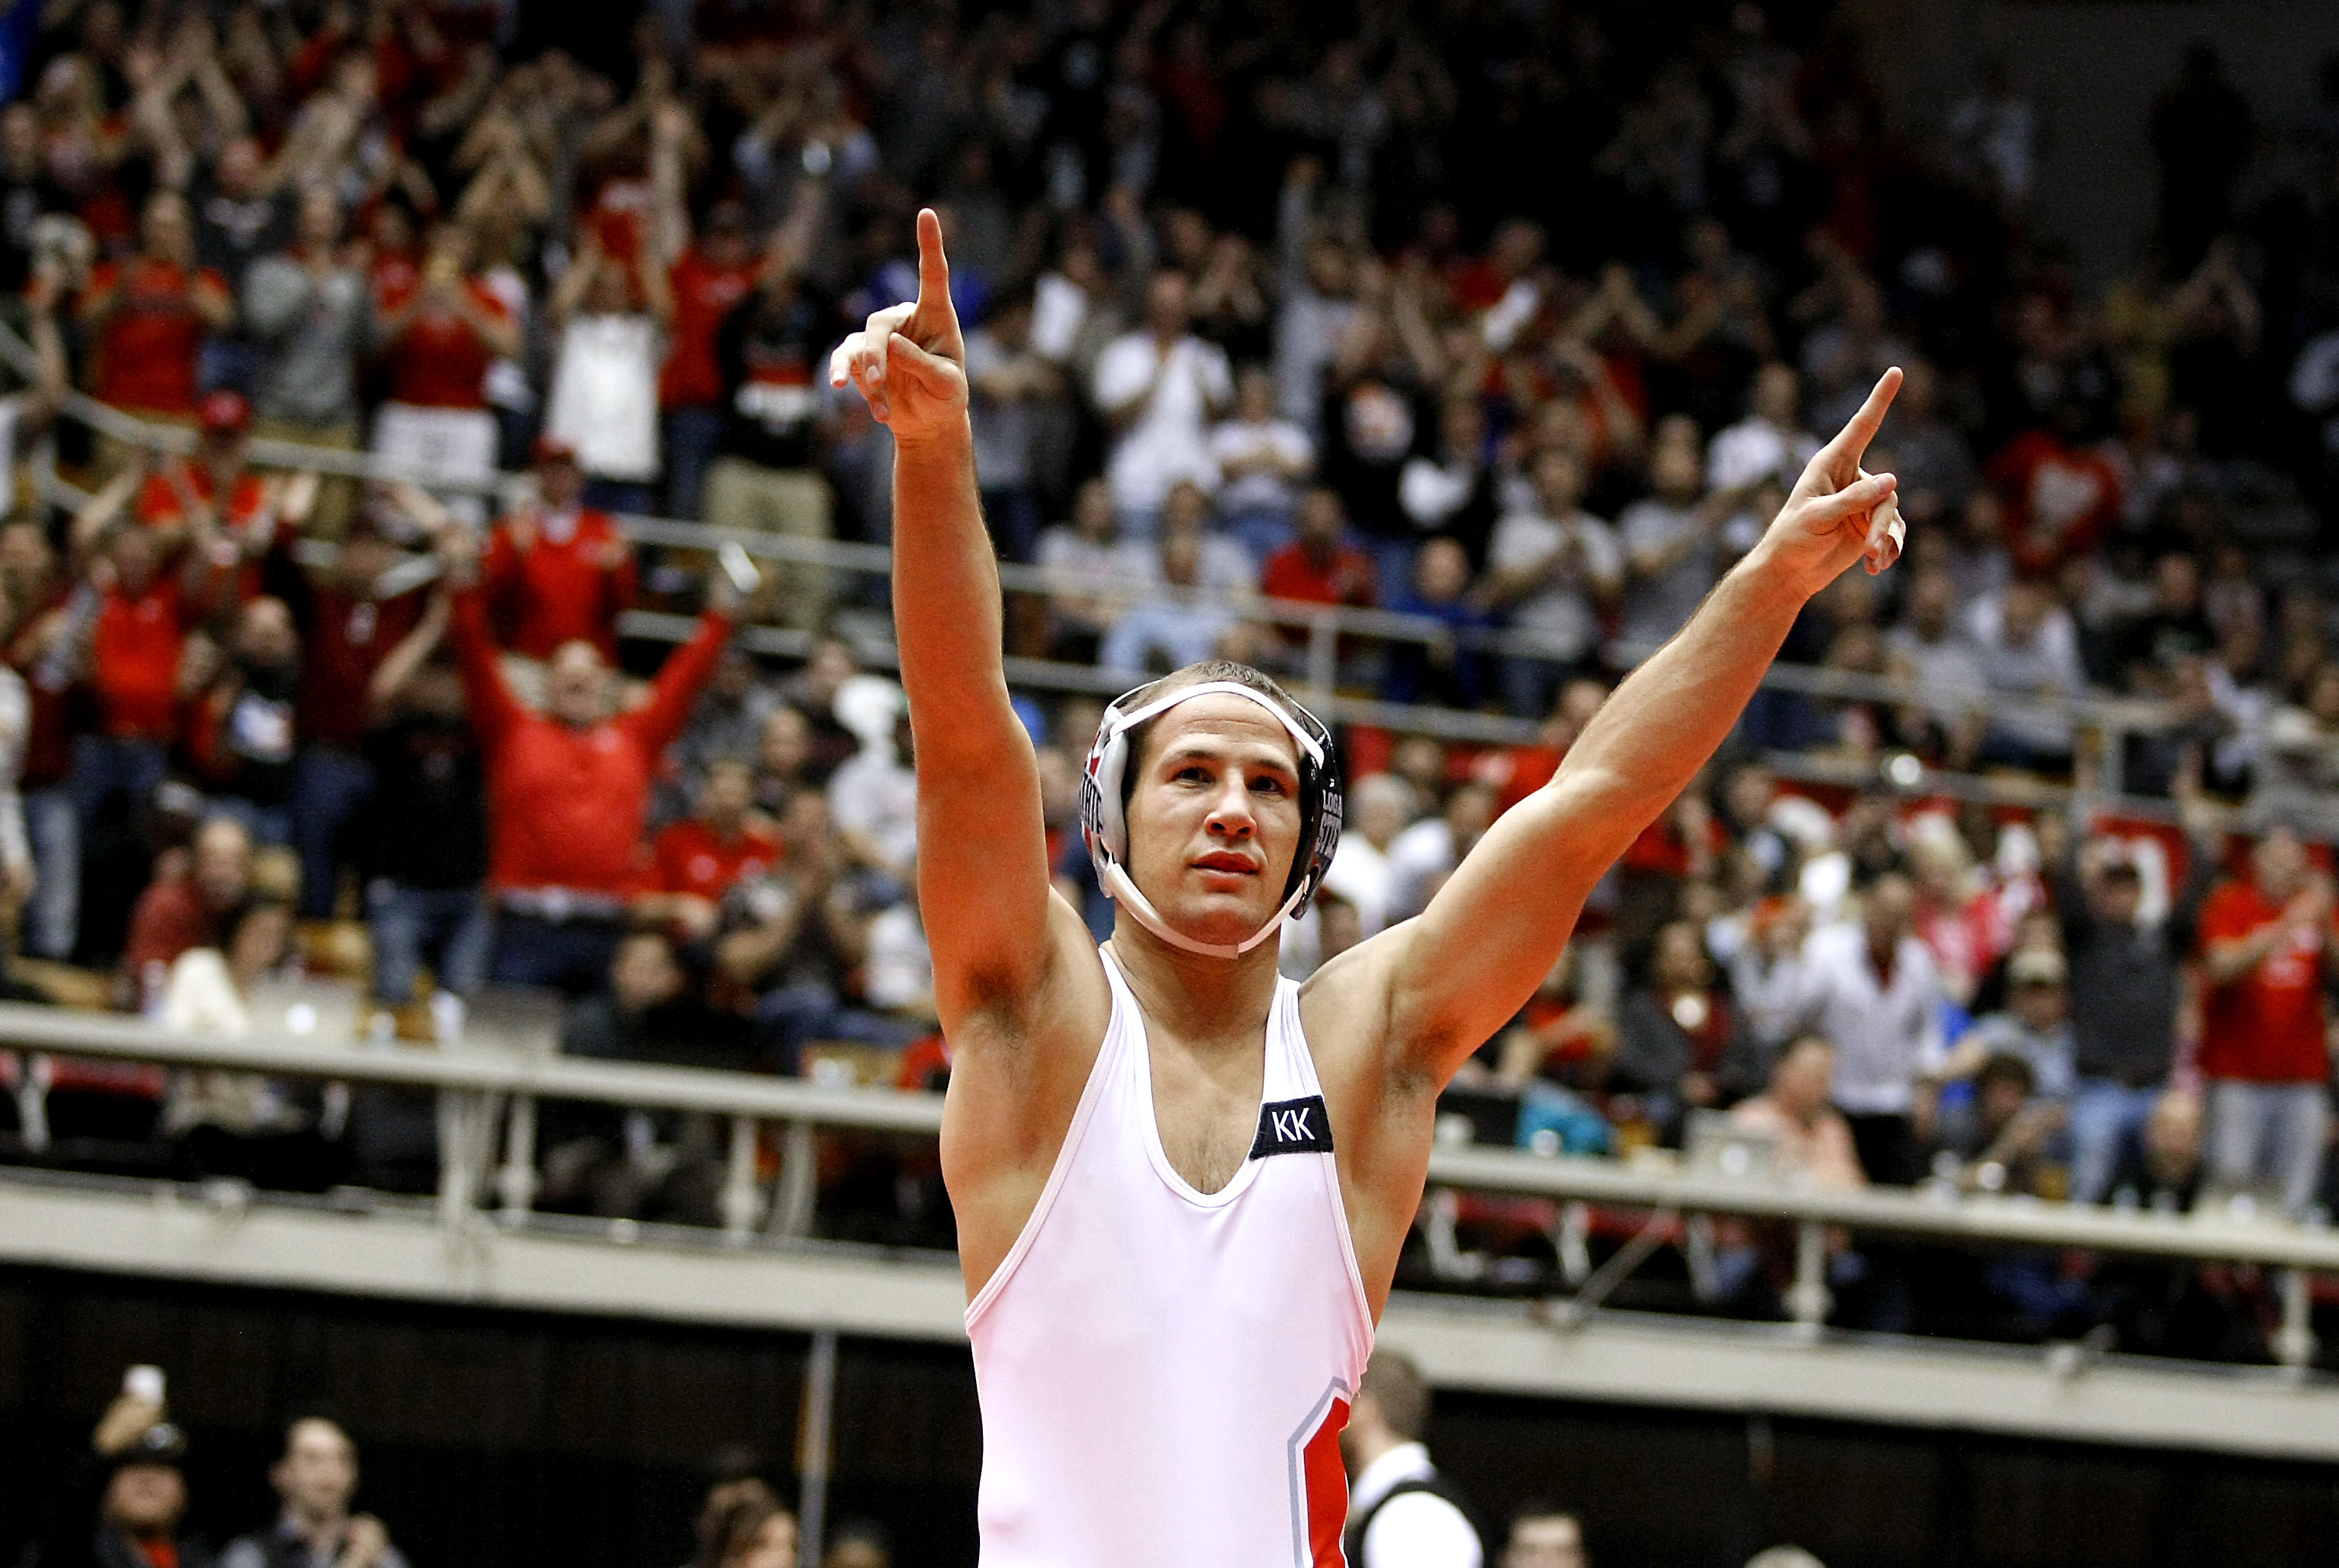 Logan Stieber of Ohio State wins the title match of the 141 pound weight class as part of the Big Ten Championships at St. John Arena. (Joe Maiorana-USA TODAY Sports)